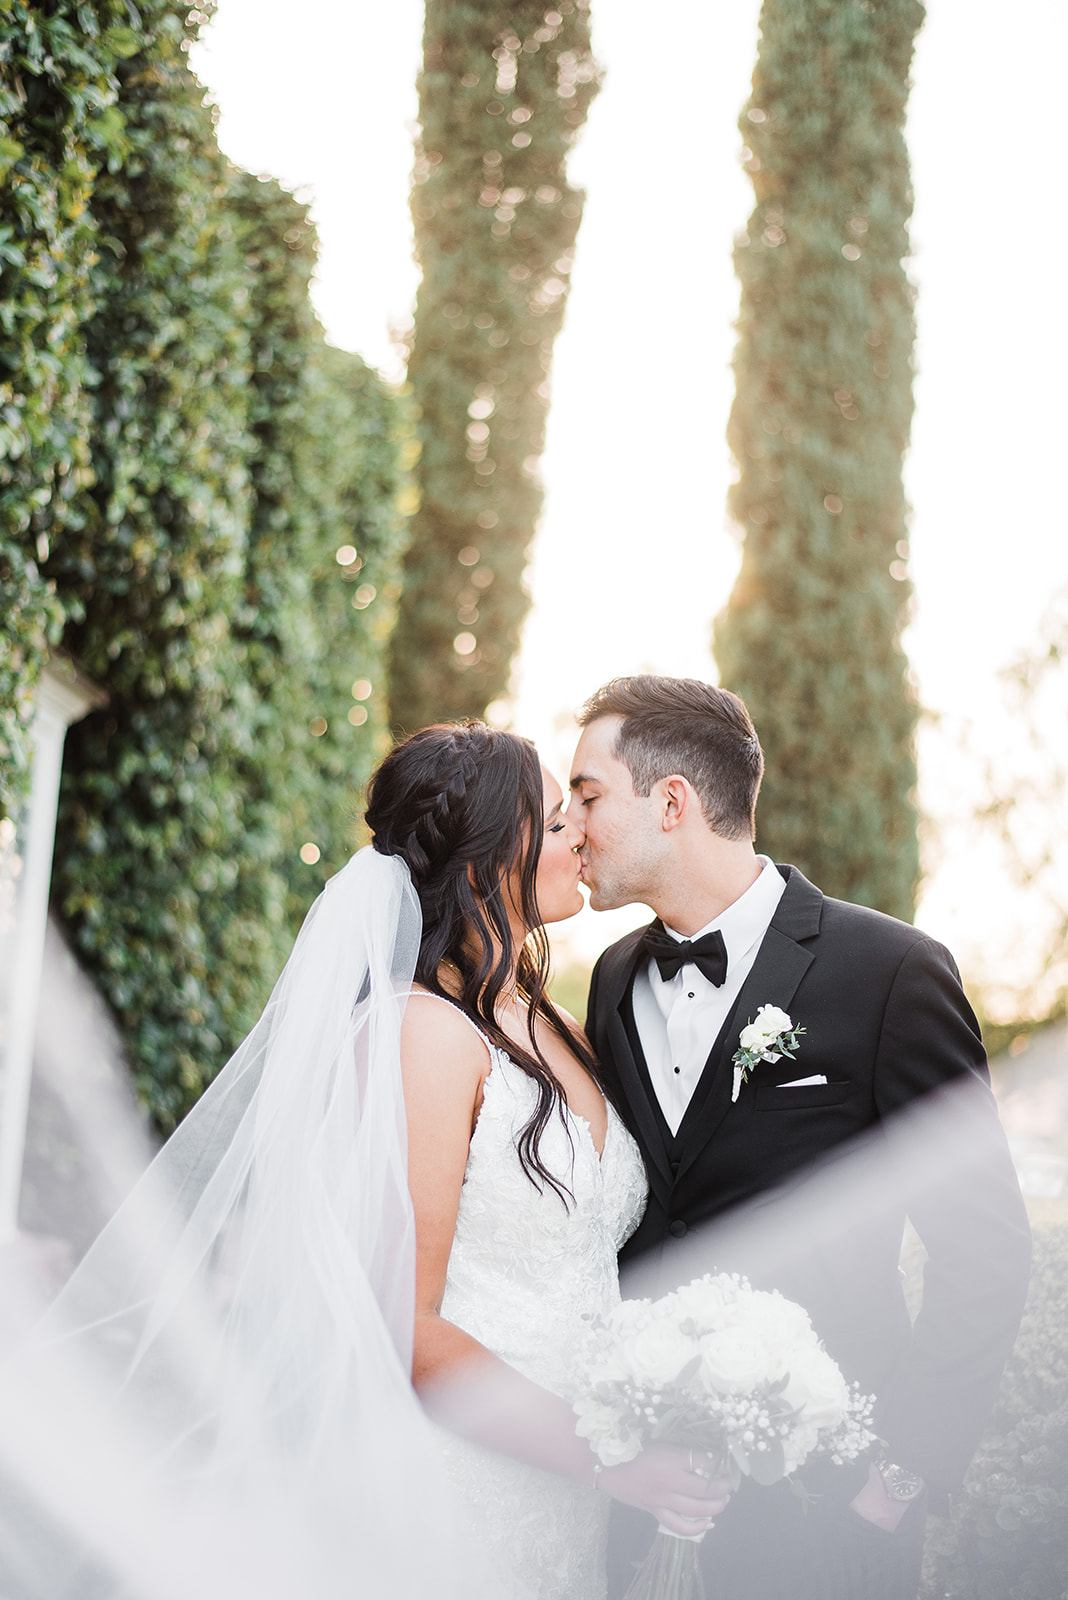 Newlyweds kiss while the veil flows in front of them in a garden at their Venue At The Grove Wedding